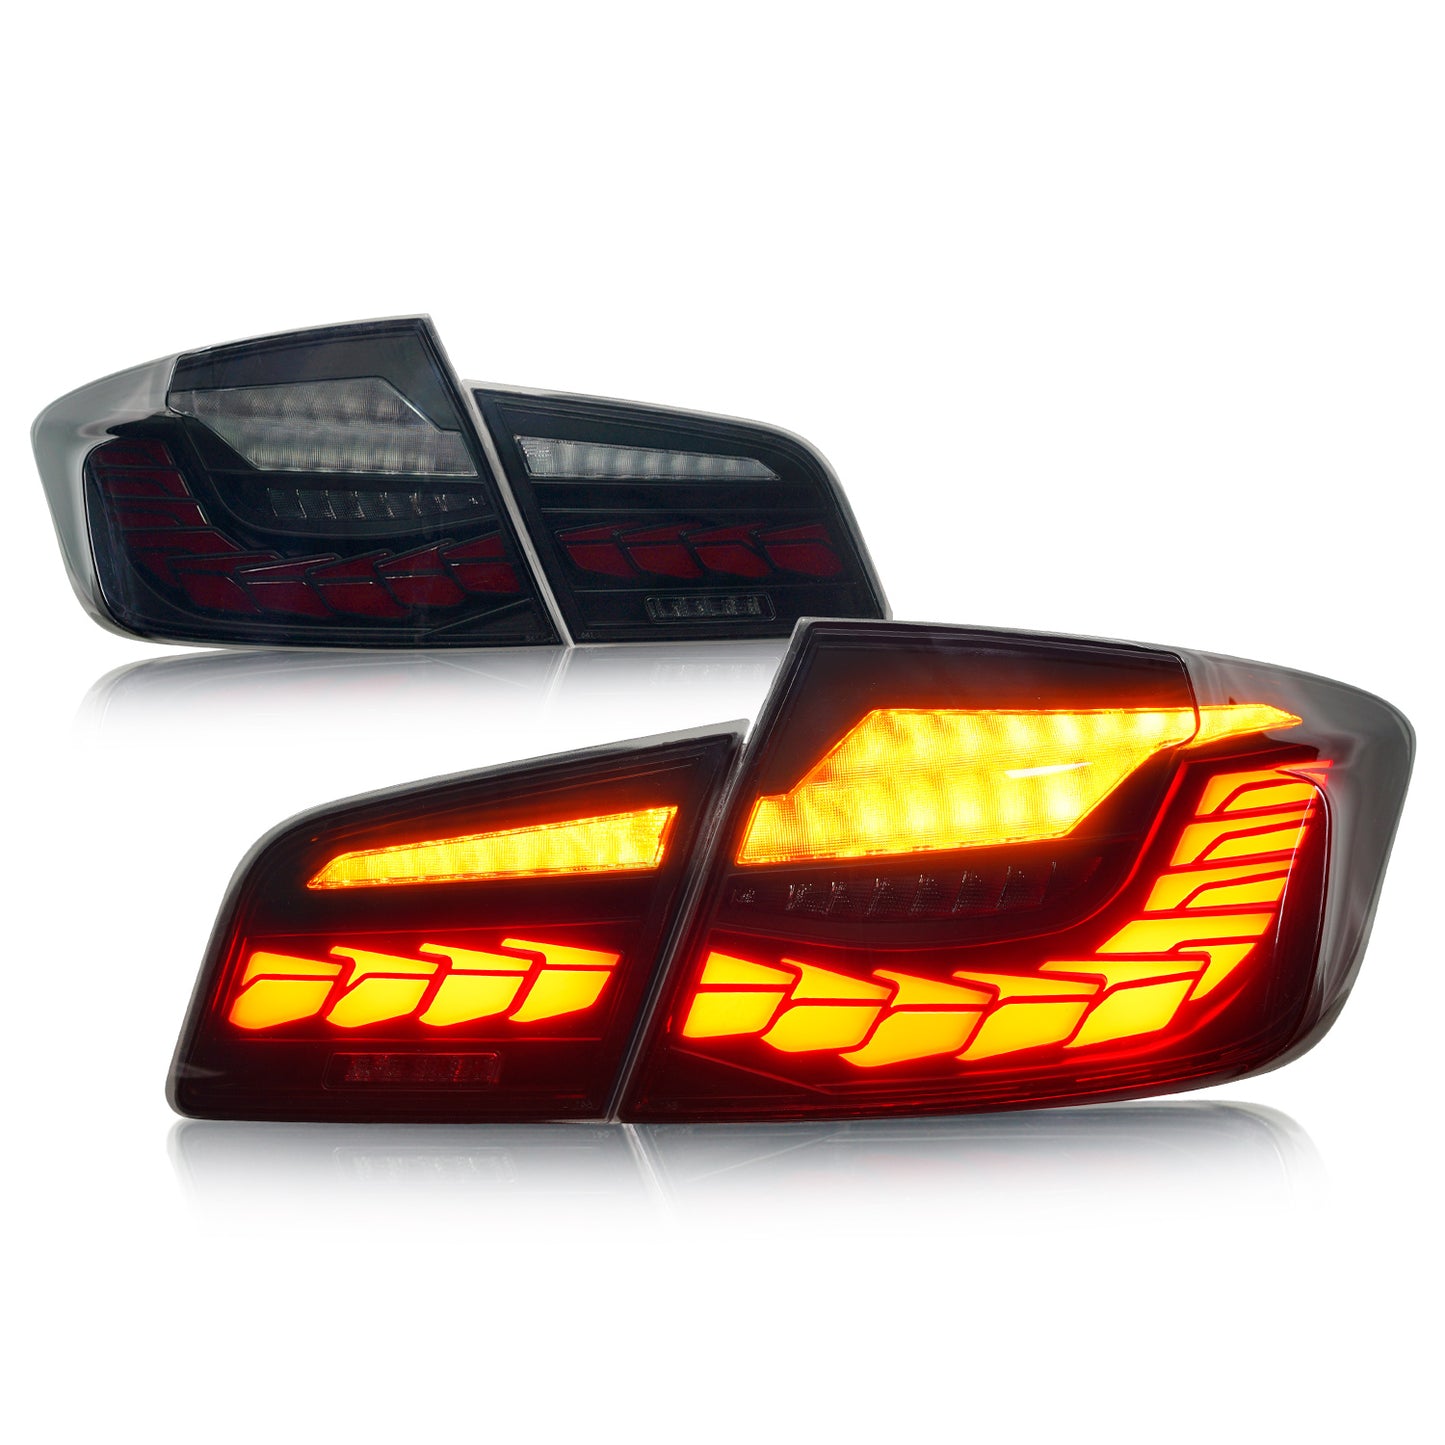 Full LED Tail Lights Assembly For BMW 5 Series M5 F10 2010-2017,Red